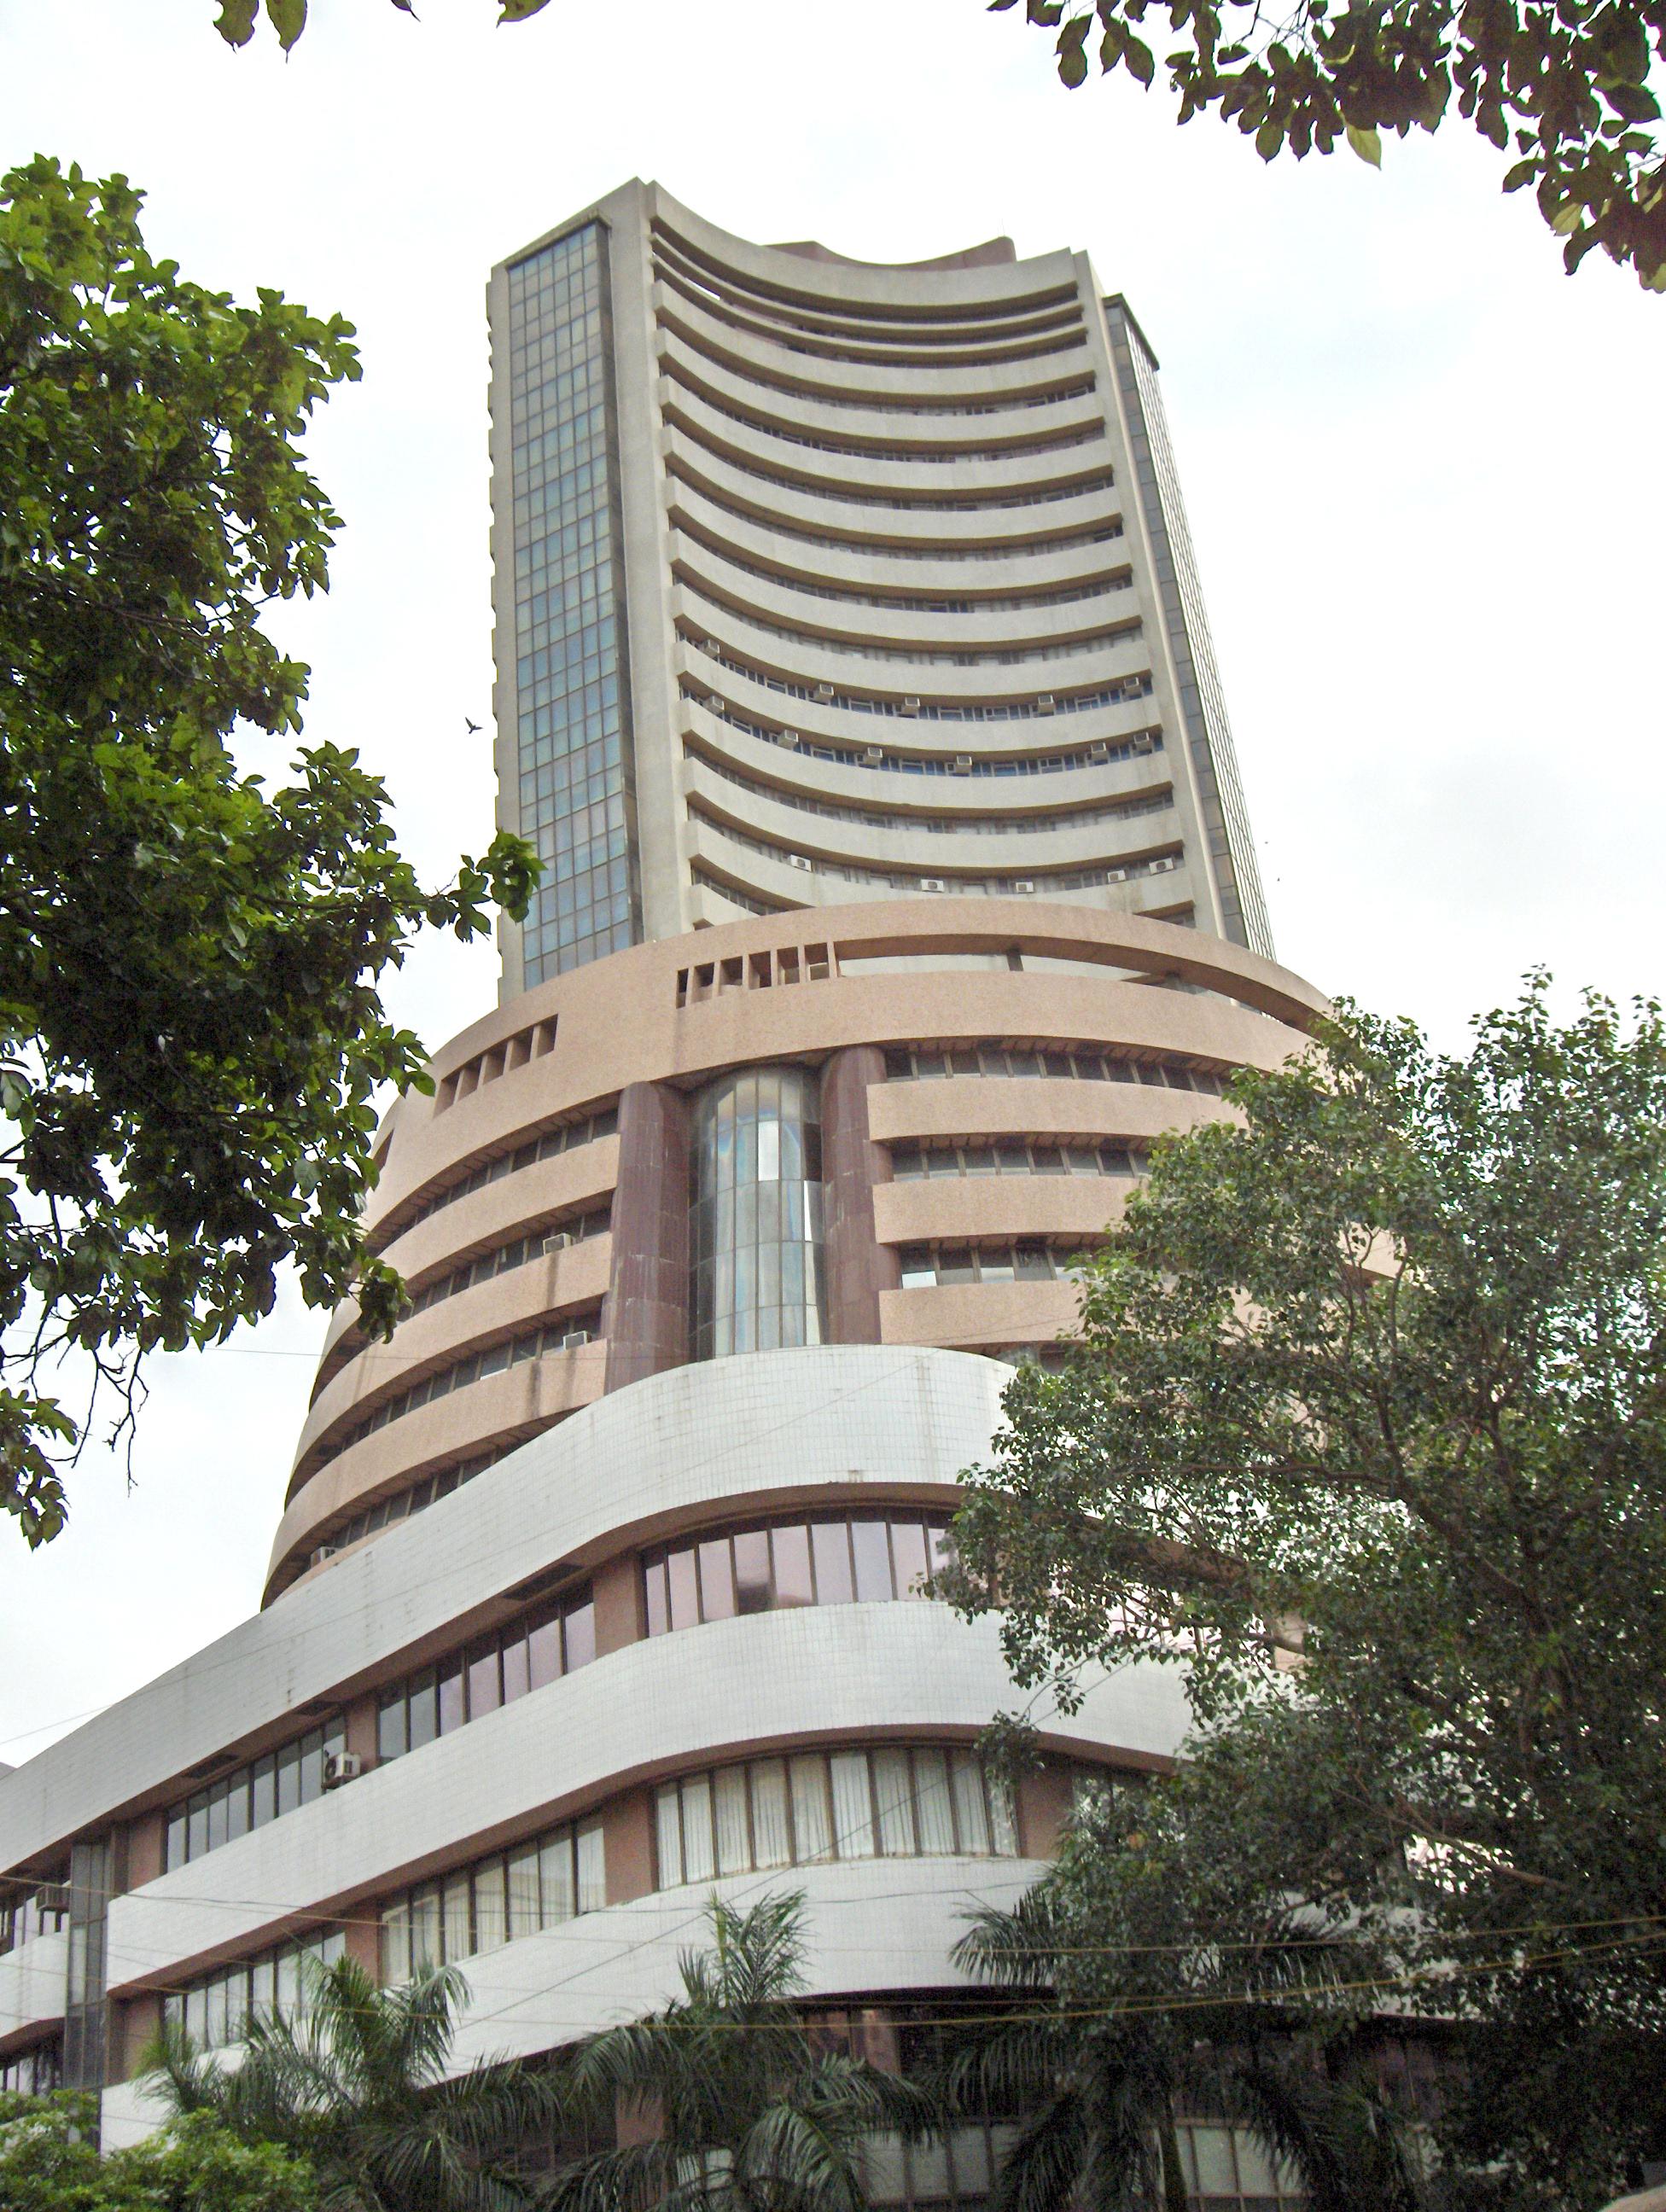 Overview of the Indian Equities Market